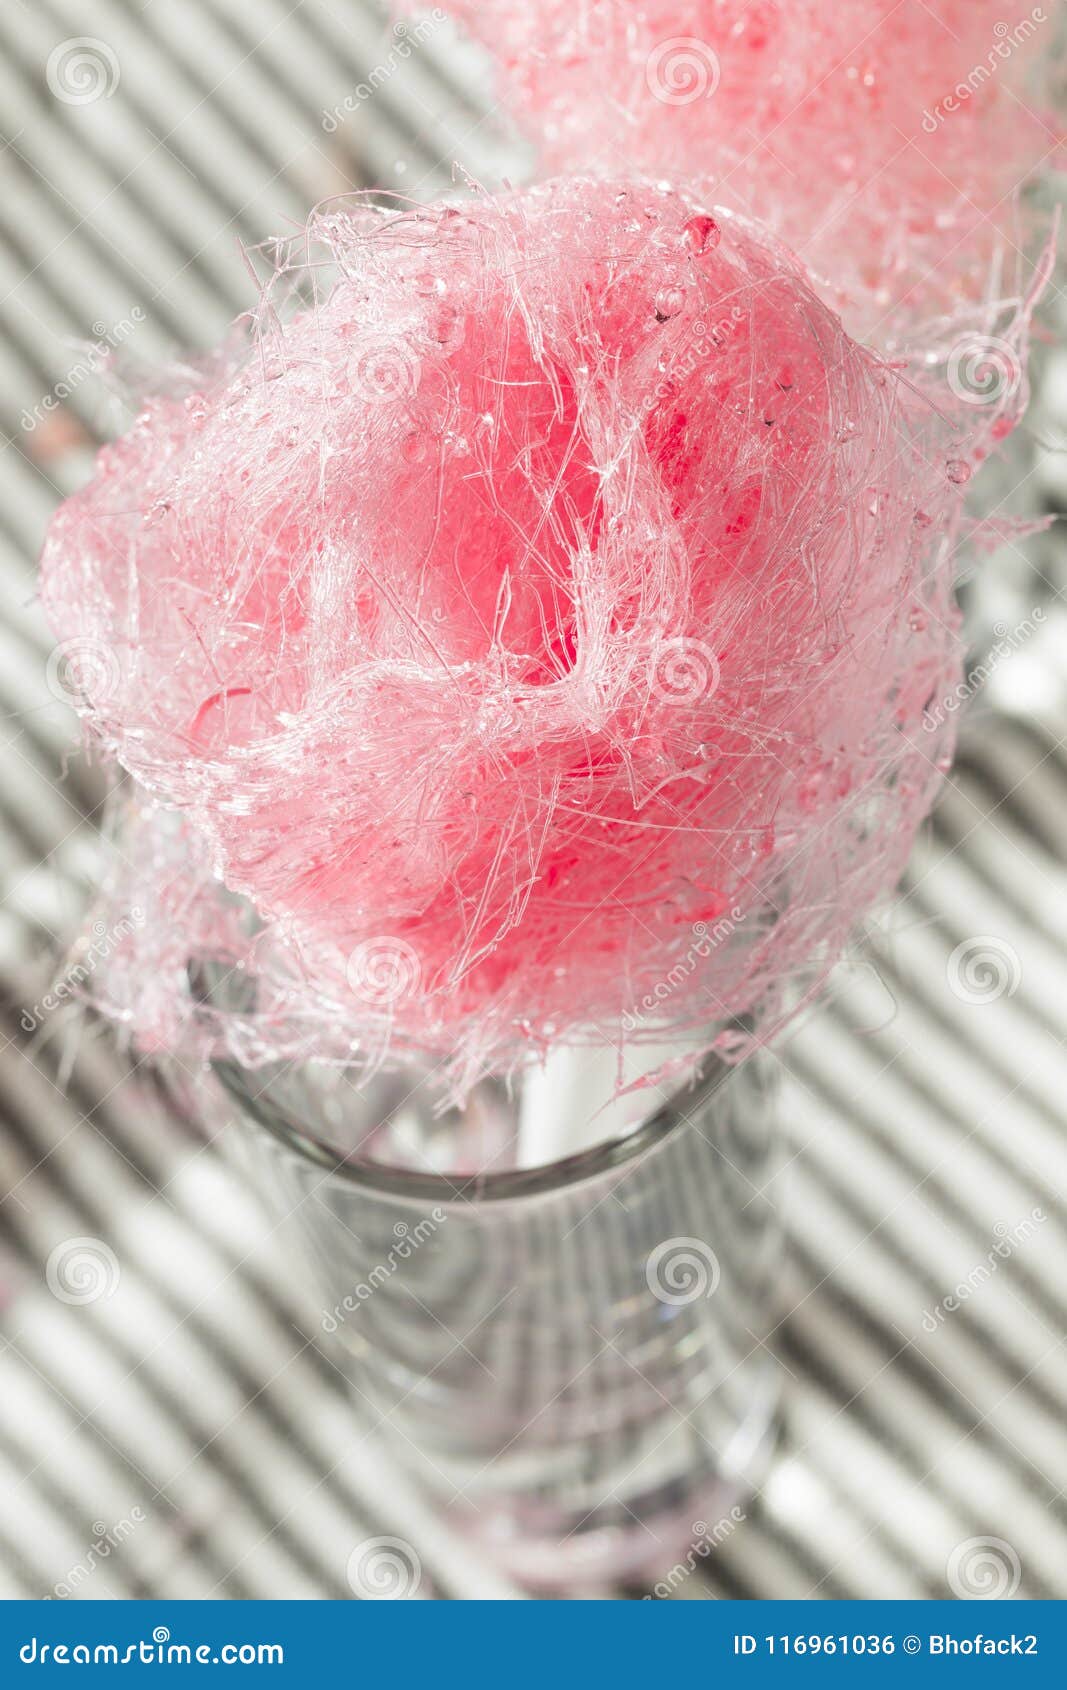 Sugary Pink Homemade Cotton Candy Floss Stock Photo Image Of Food Sticky